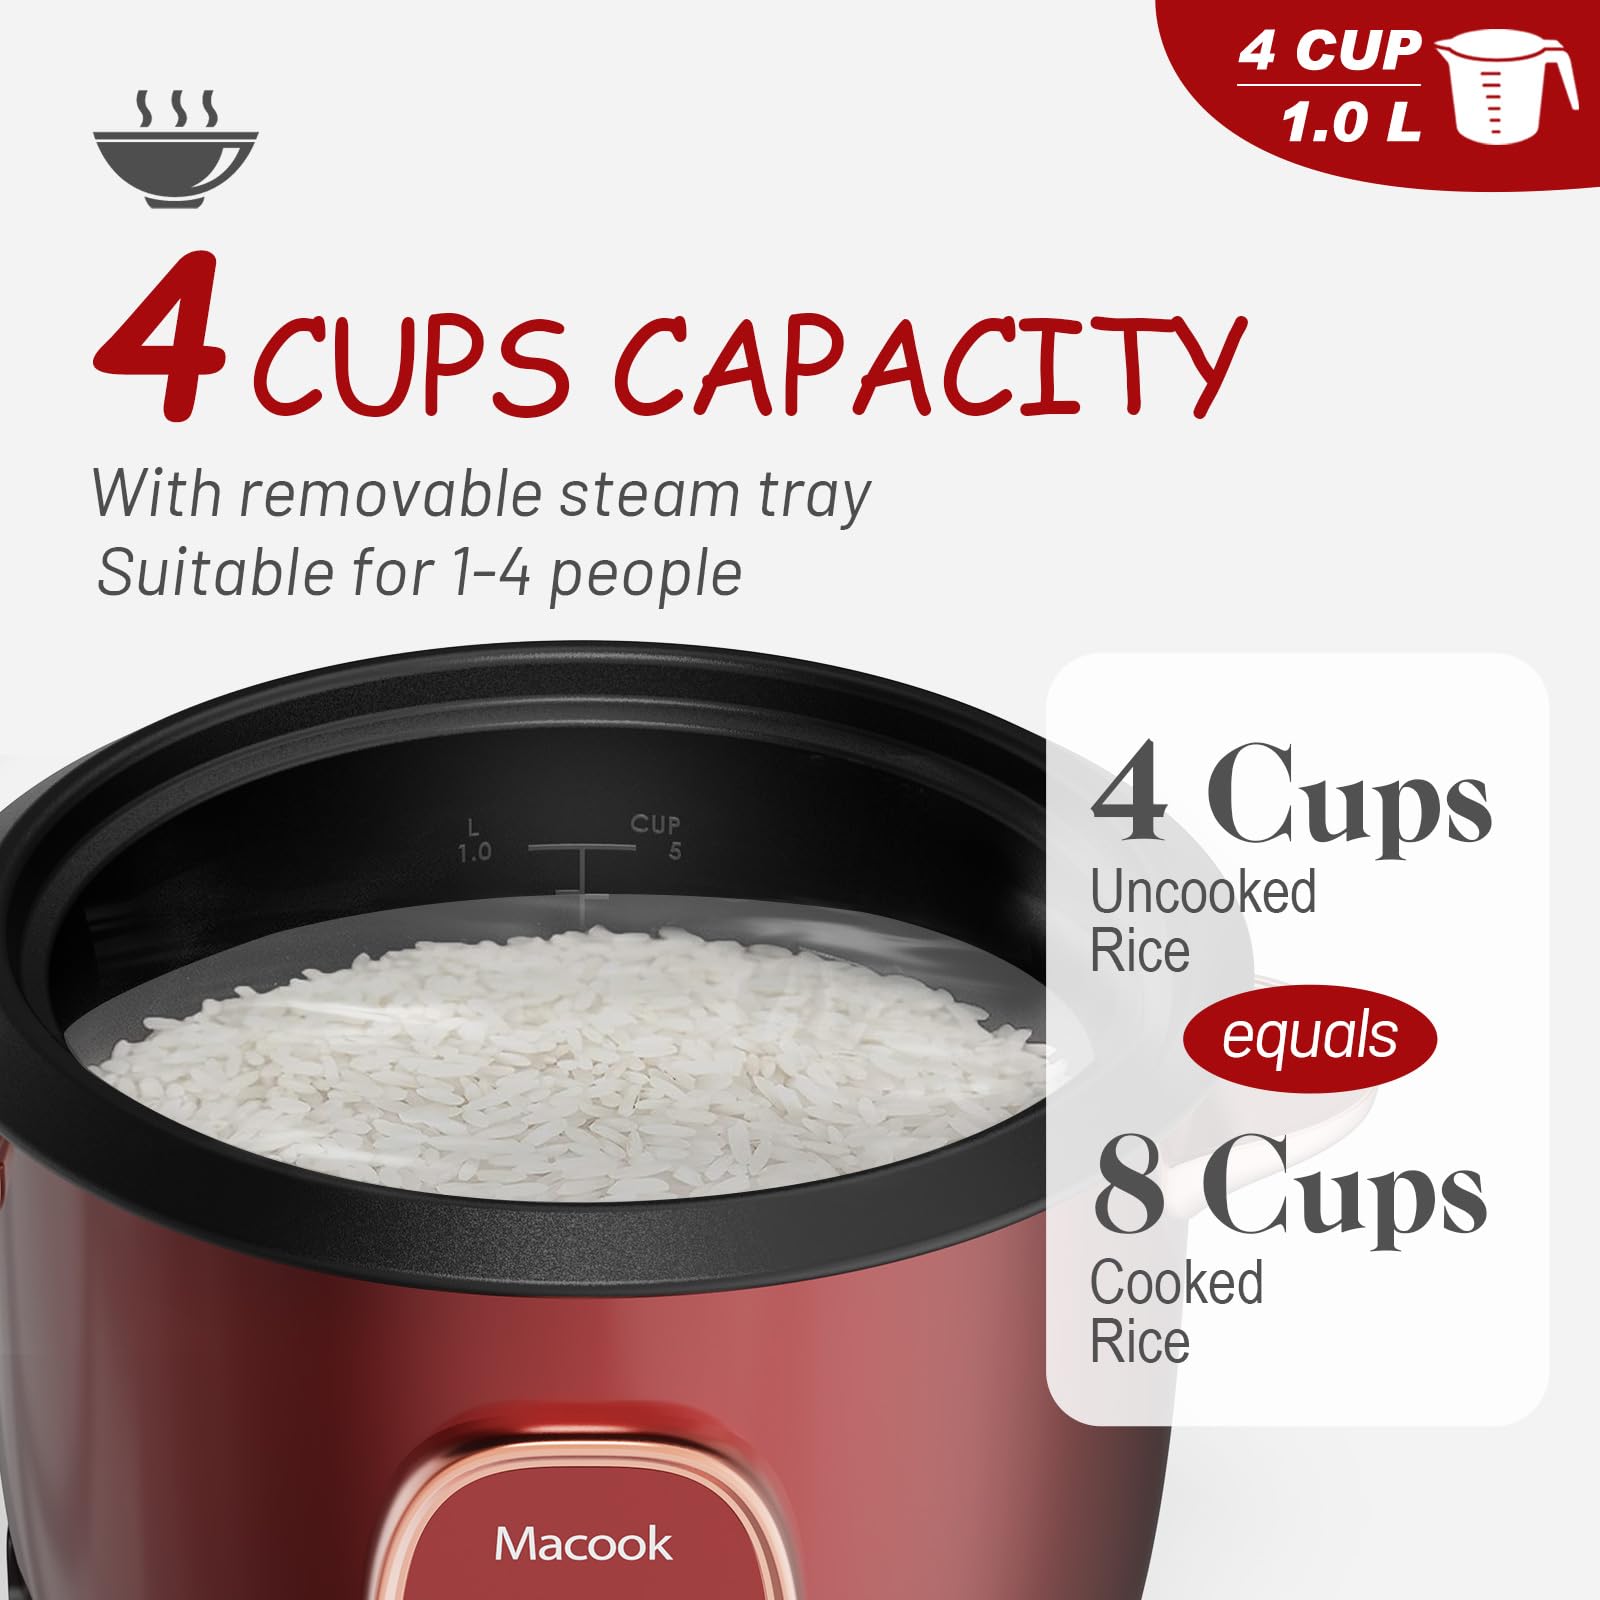 Macook Mini Rice Cooker Small Rice Cooker 3 Cup, Portable Travel Rice Cooker, Auto Keep Warm